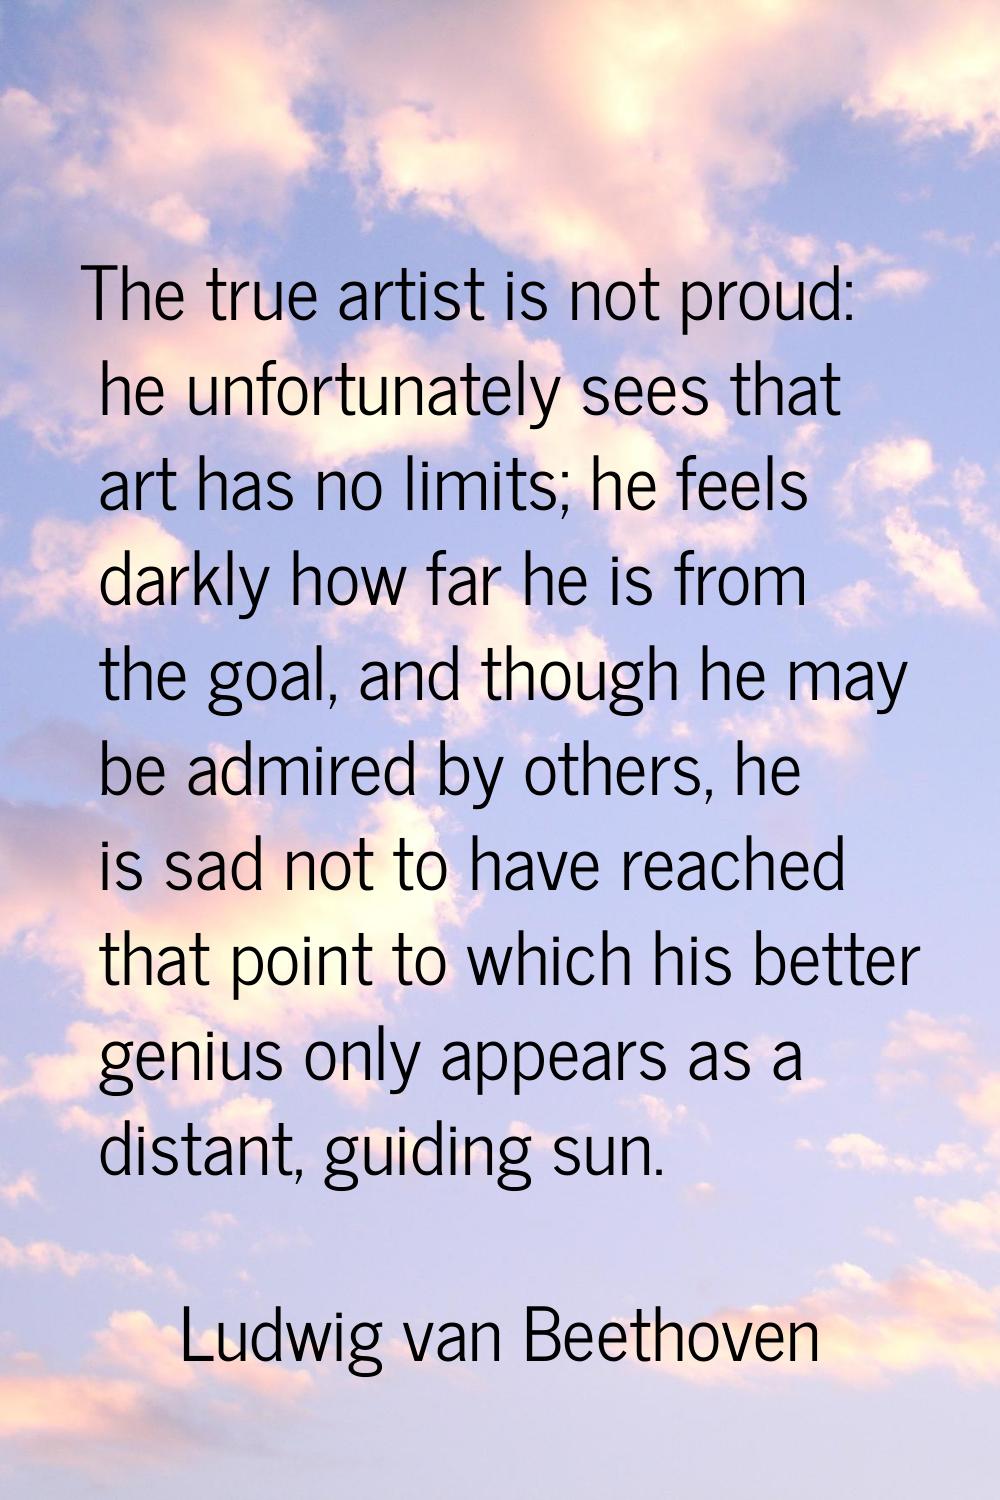 The true artist is not proud: he unfortunately sees that art has no limits; he feels darkly how far